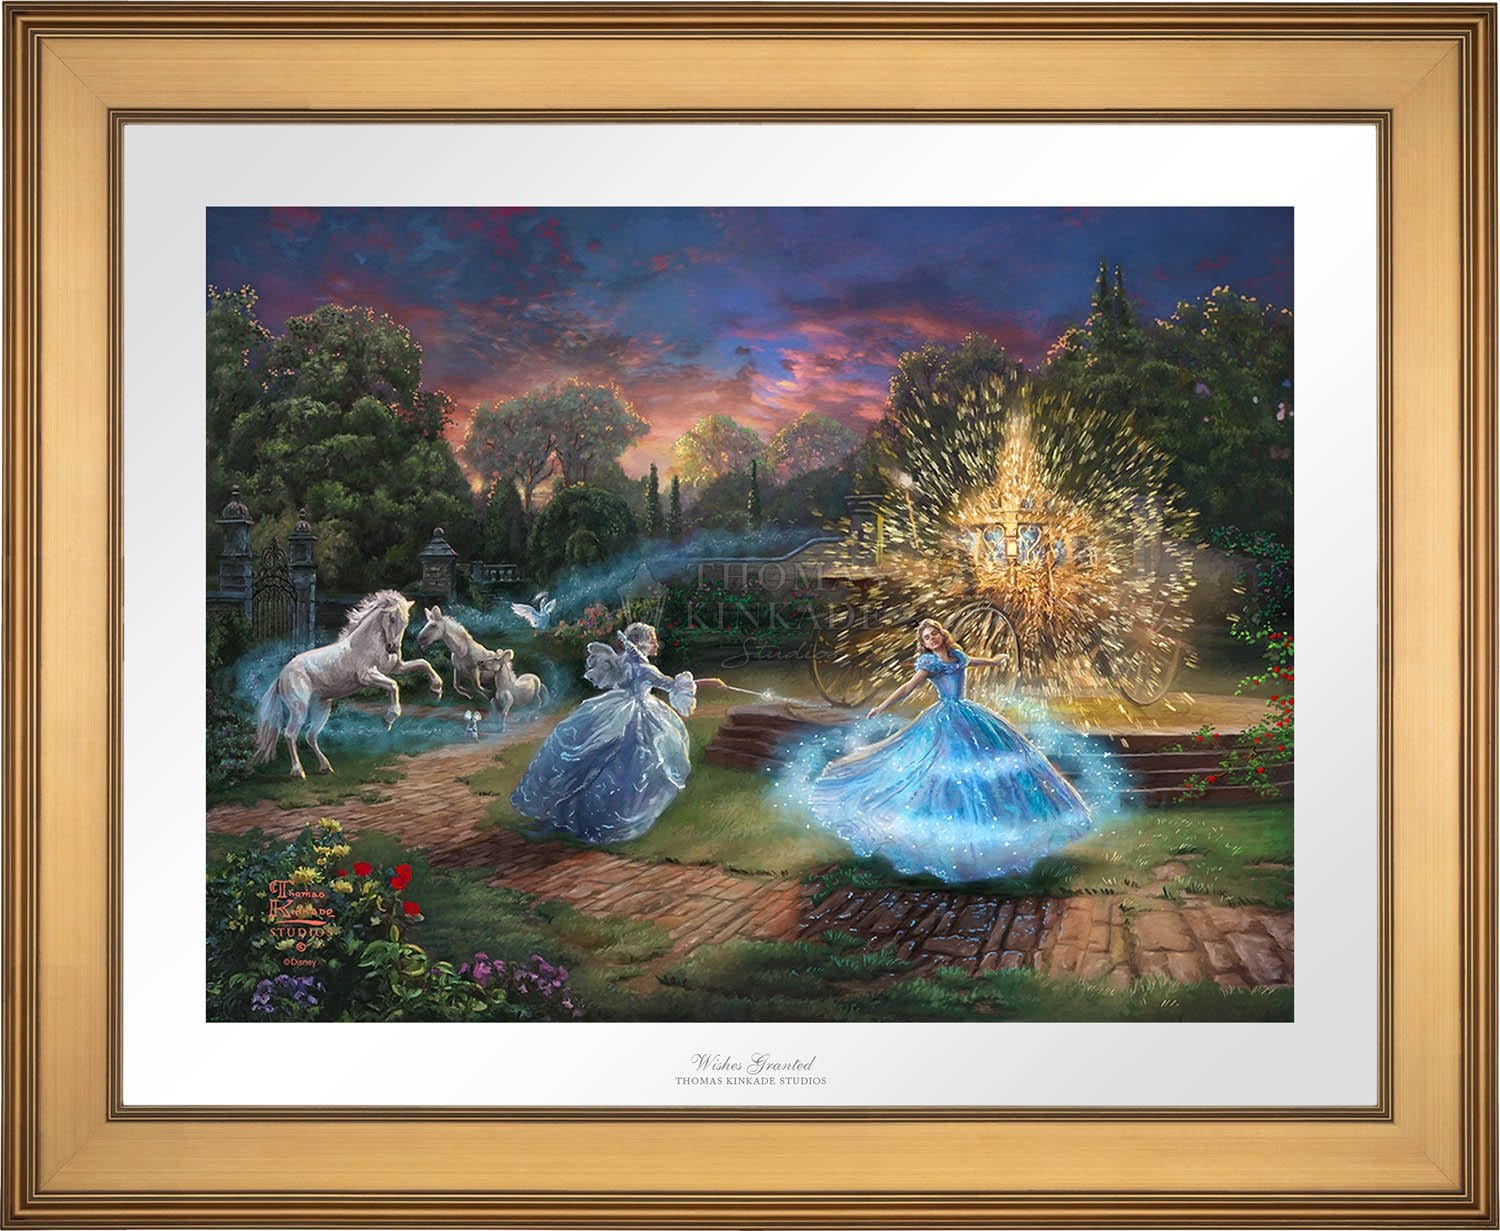 Wishes Granted features Cinderella's enchanted transformation with the help of her Fairy Godmother  - Gold Frane